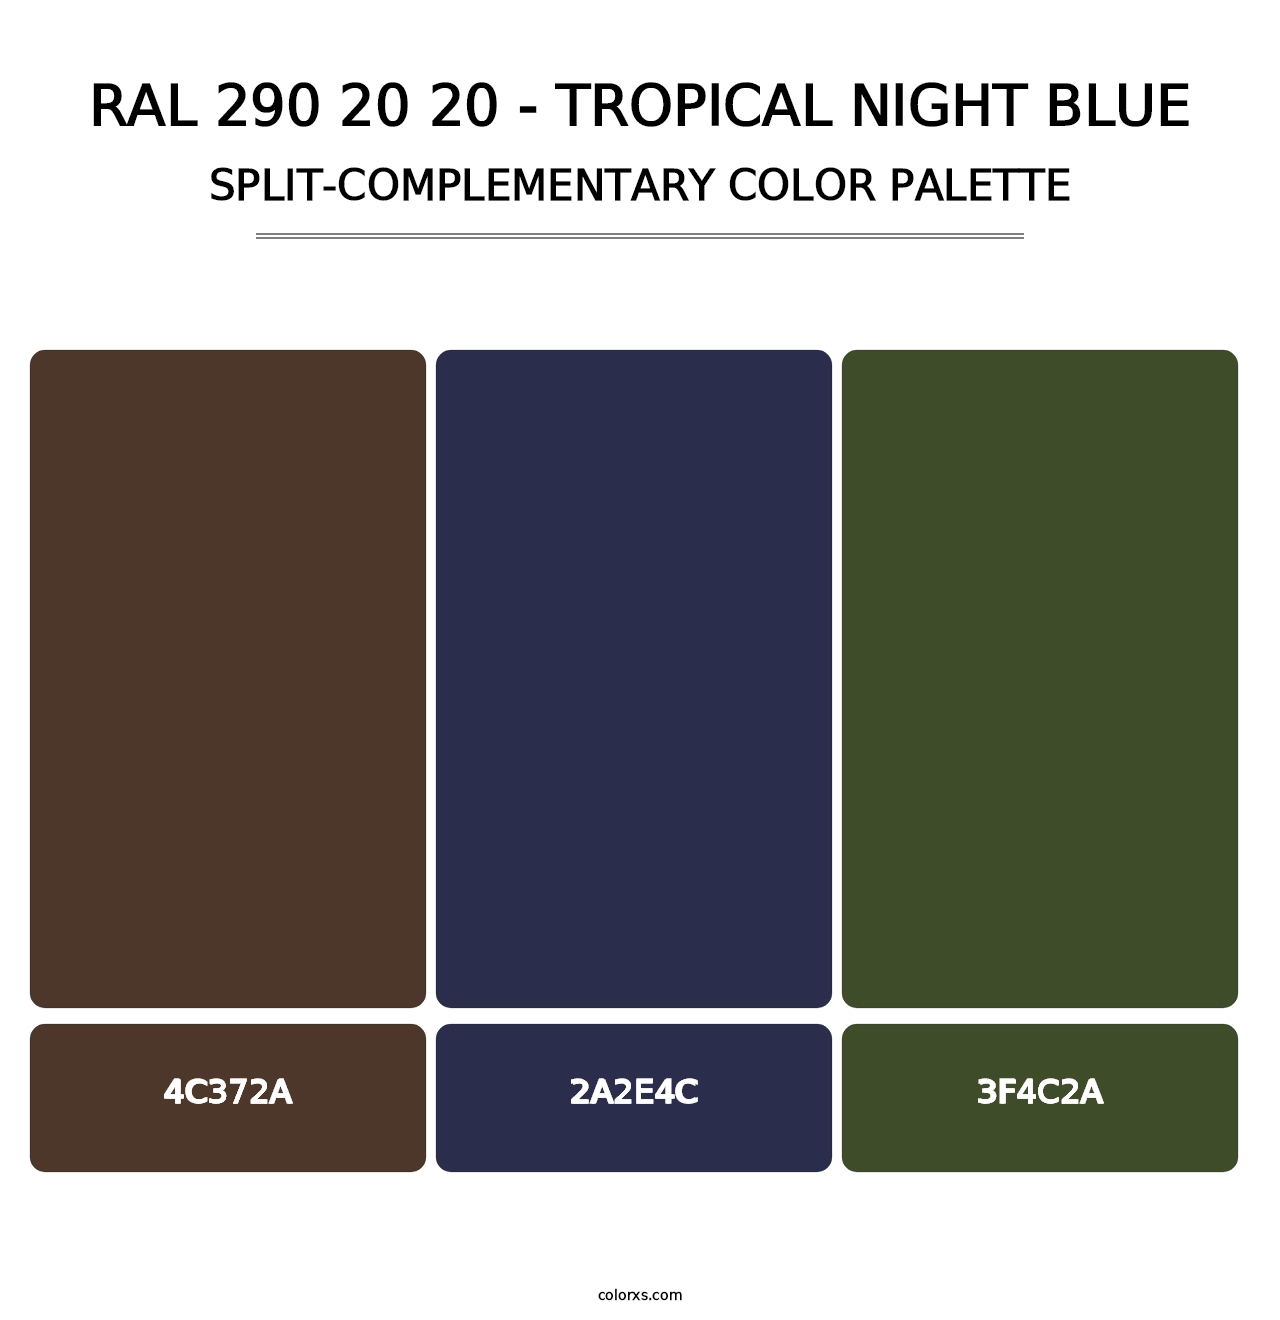 RAL 290 20 20 - Tropical Night Blue - Split-Complementary Color Palette